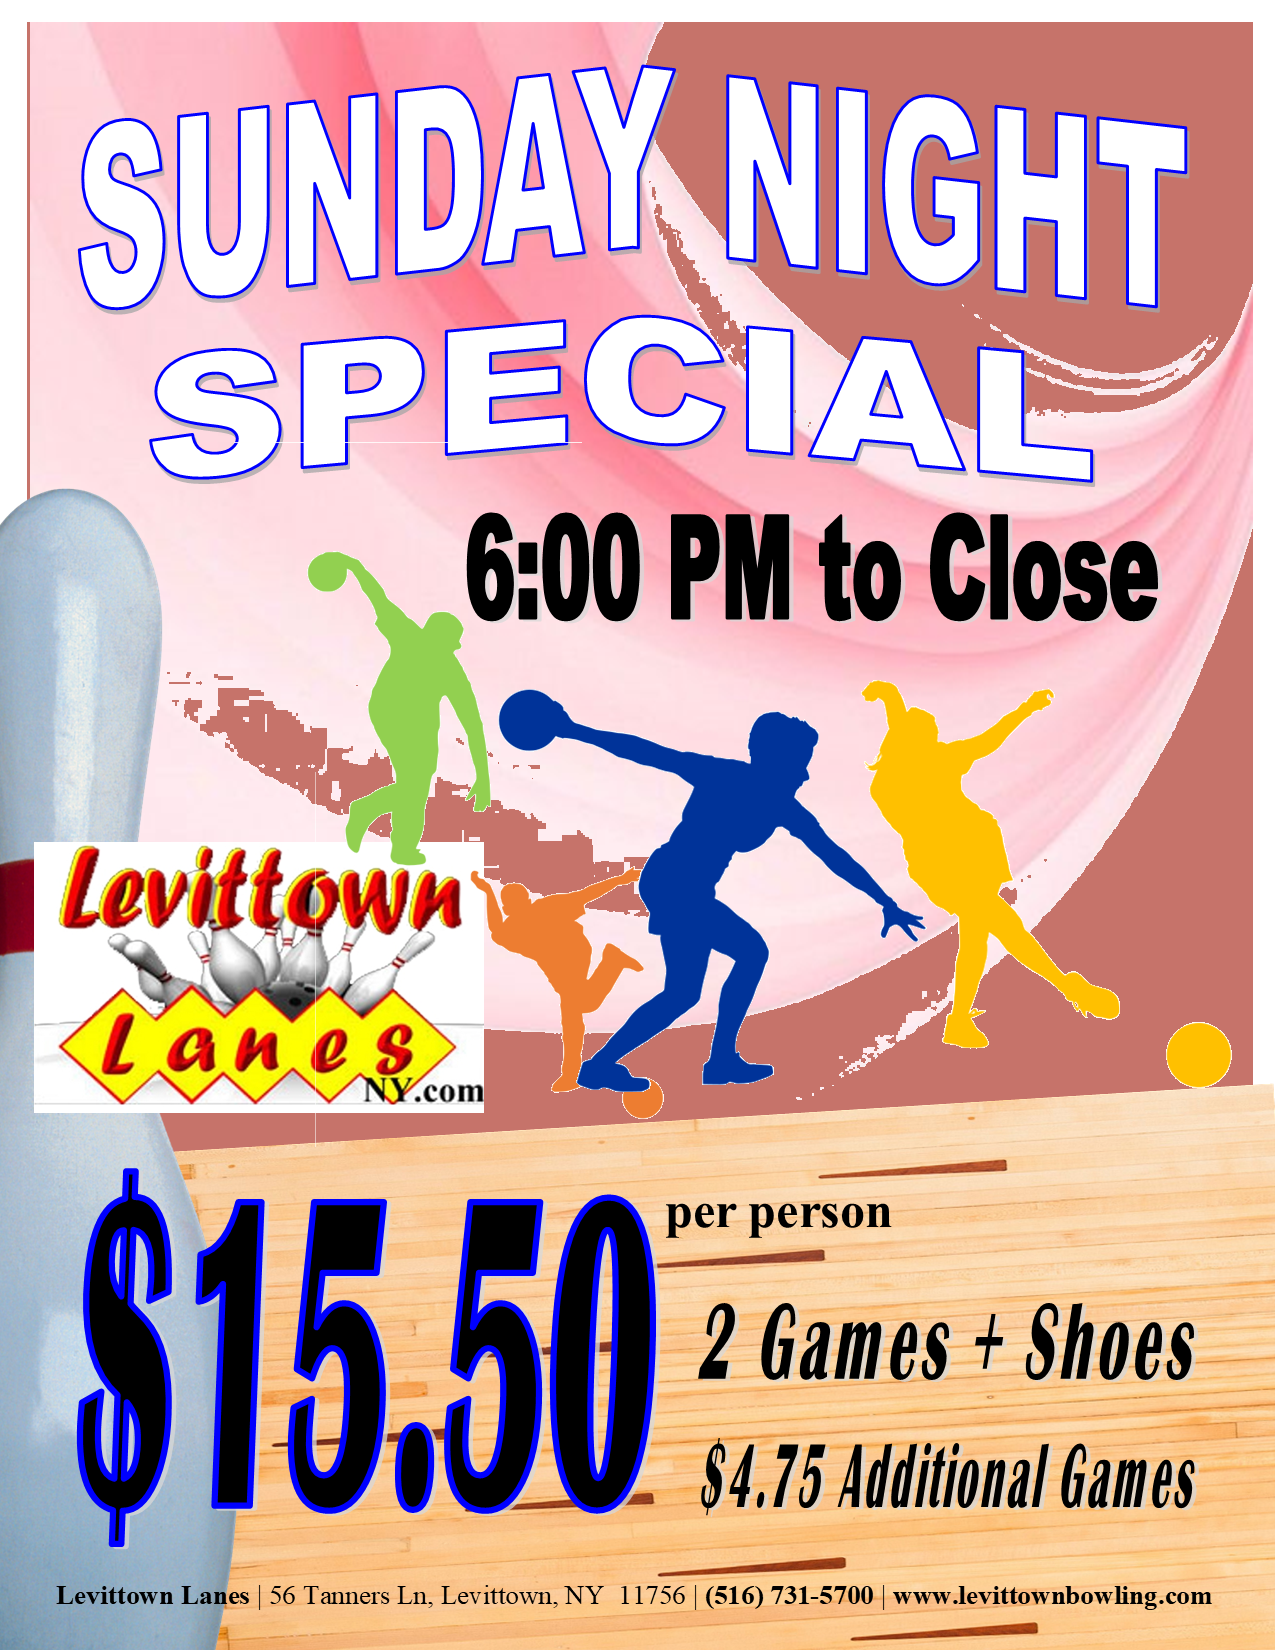 NEW Sunday Night Special at Levittown Lanes